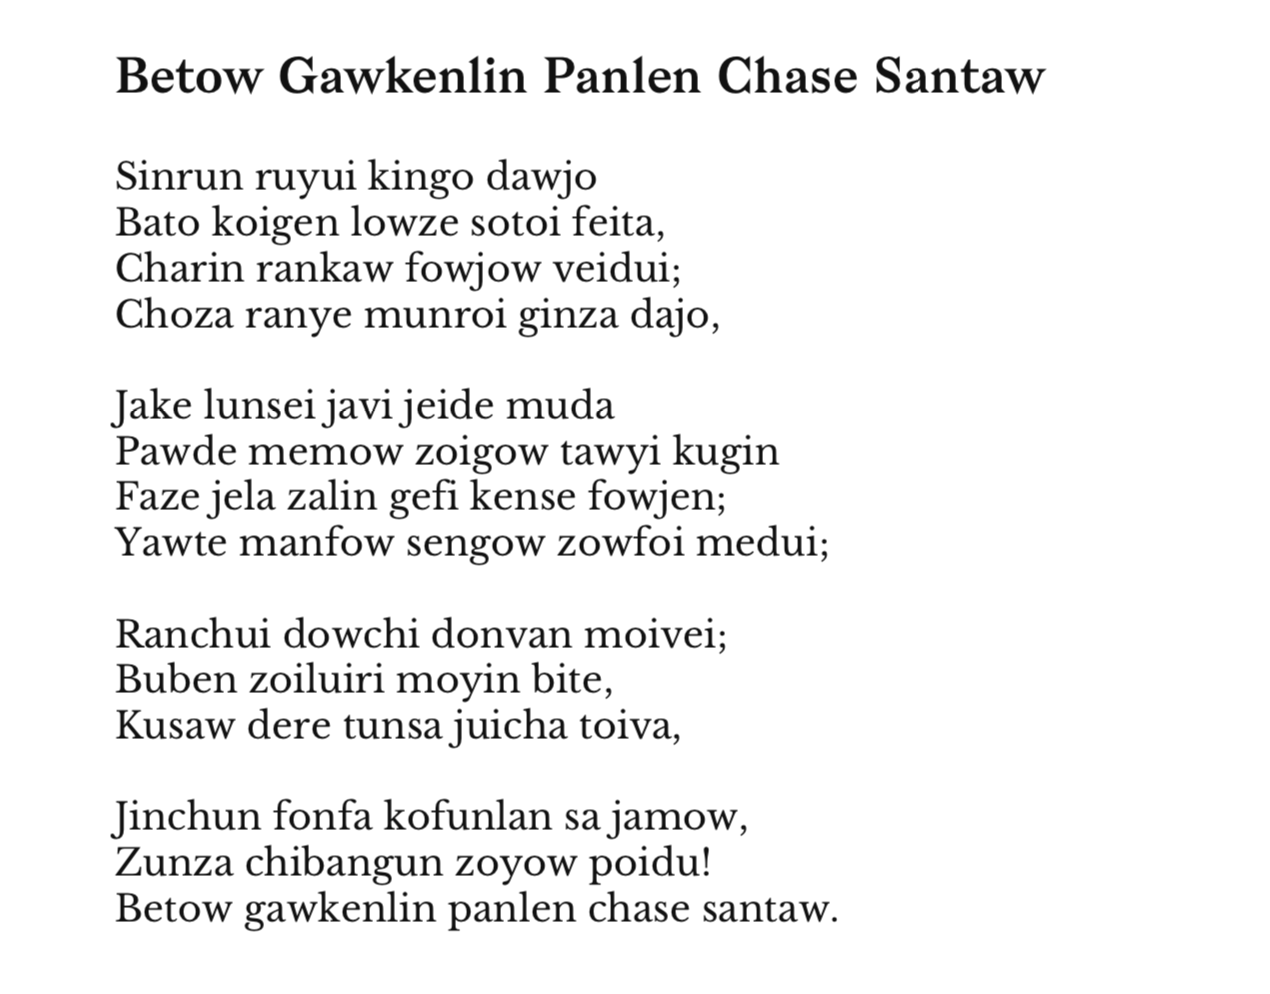 Example of a generated sonnet rhyming ‘jamow’ and ‘santow’